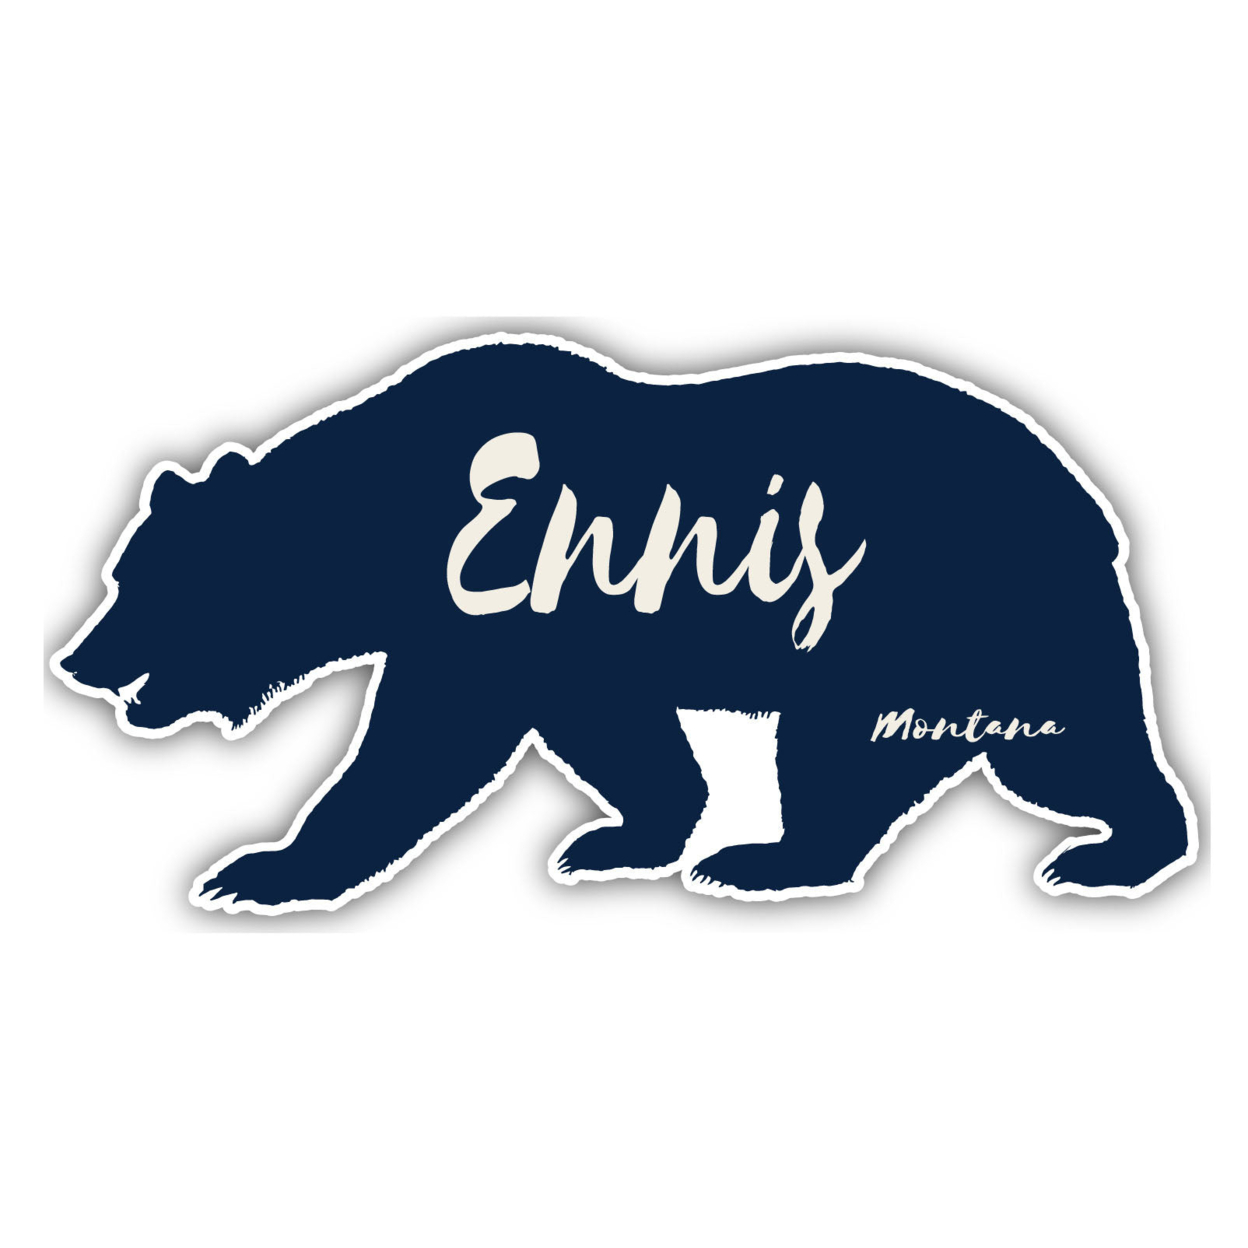 Ennis Montana Souvenir Decorative Stickers (Choose Theme And Size) - 4-Pack, 4-Inch, Great Outdoors